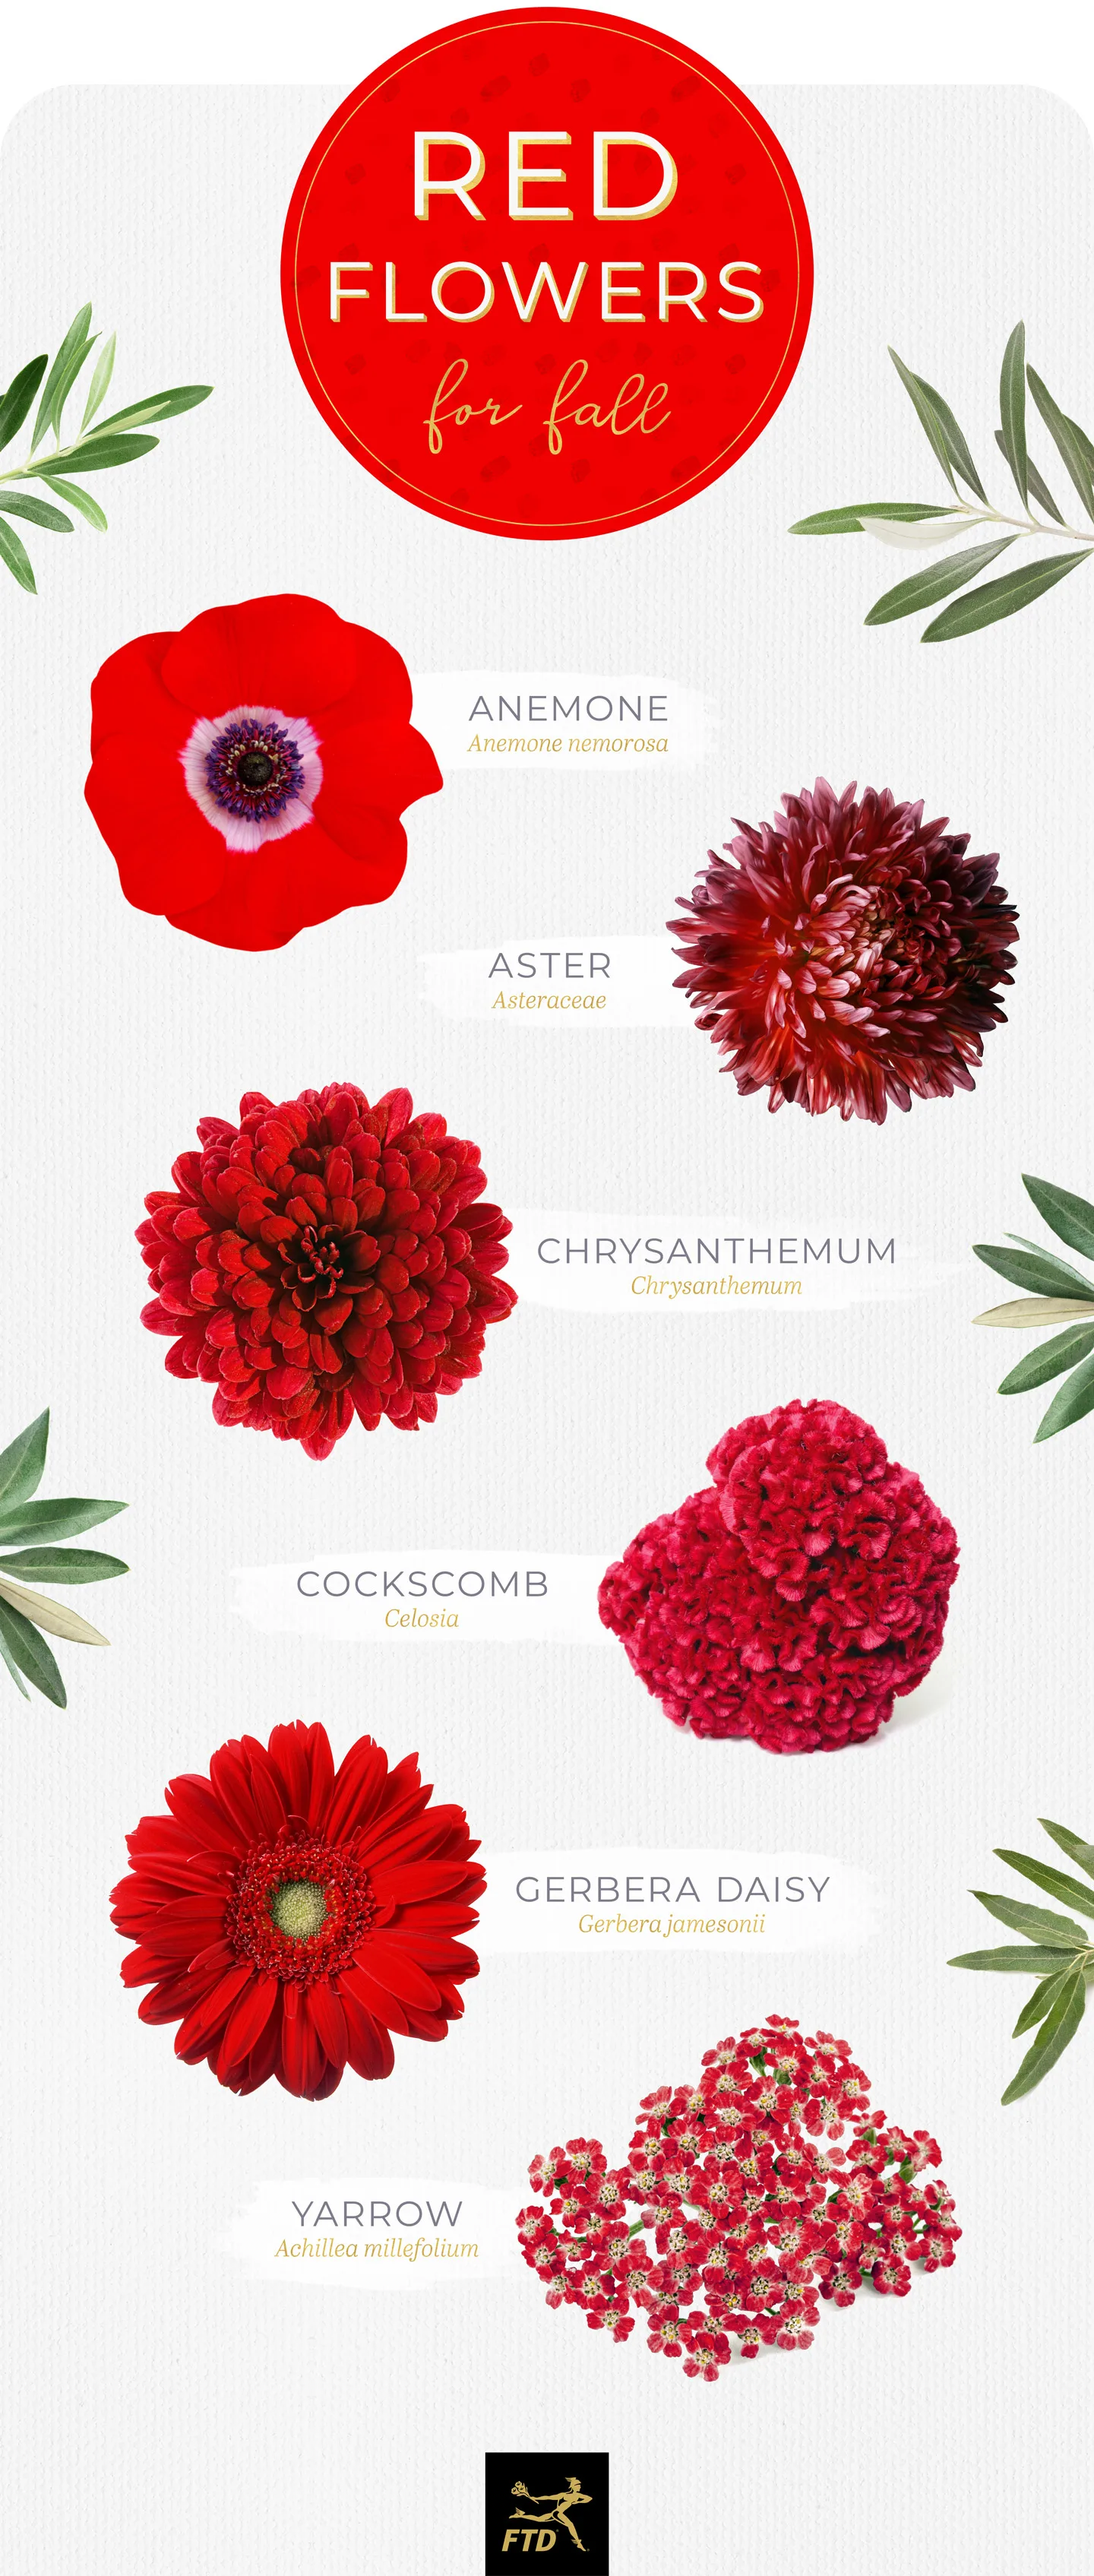 40 Types of Red Flowers